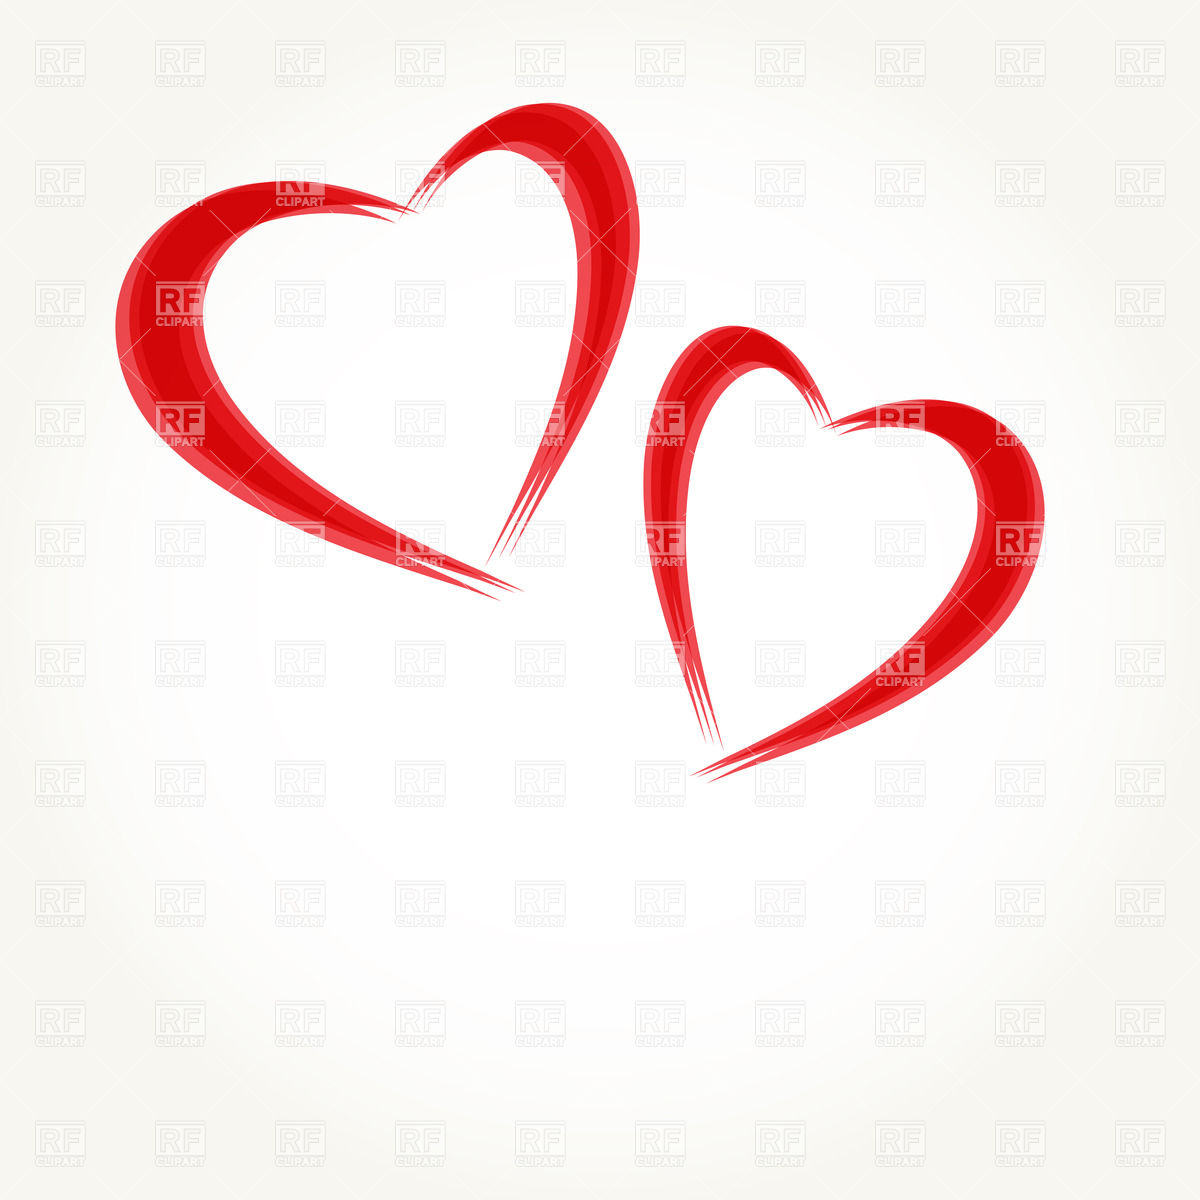 Two Stylized Hearts Download Royalty Free Vector Clipart  Eps